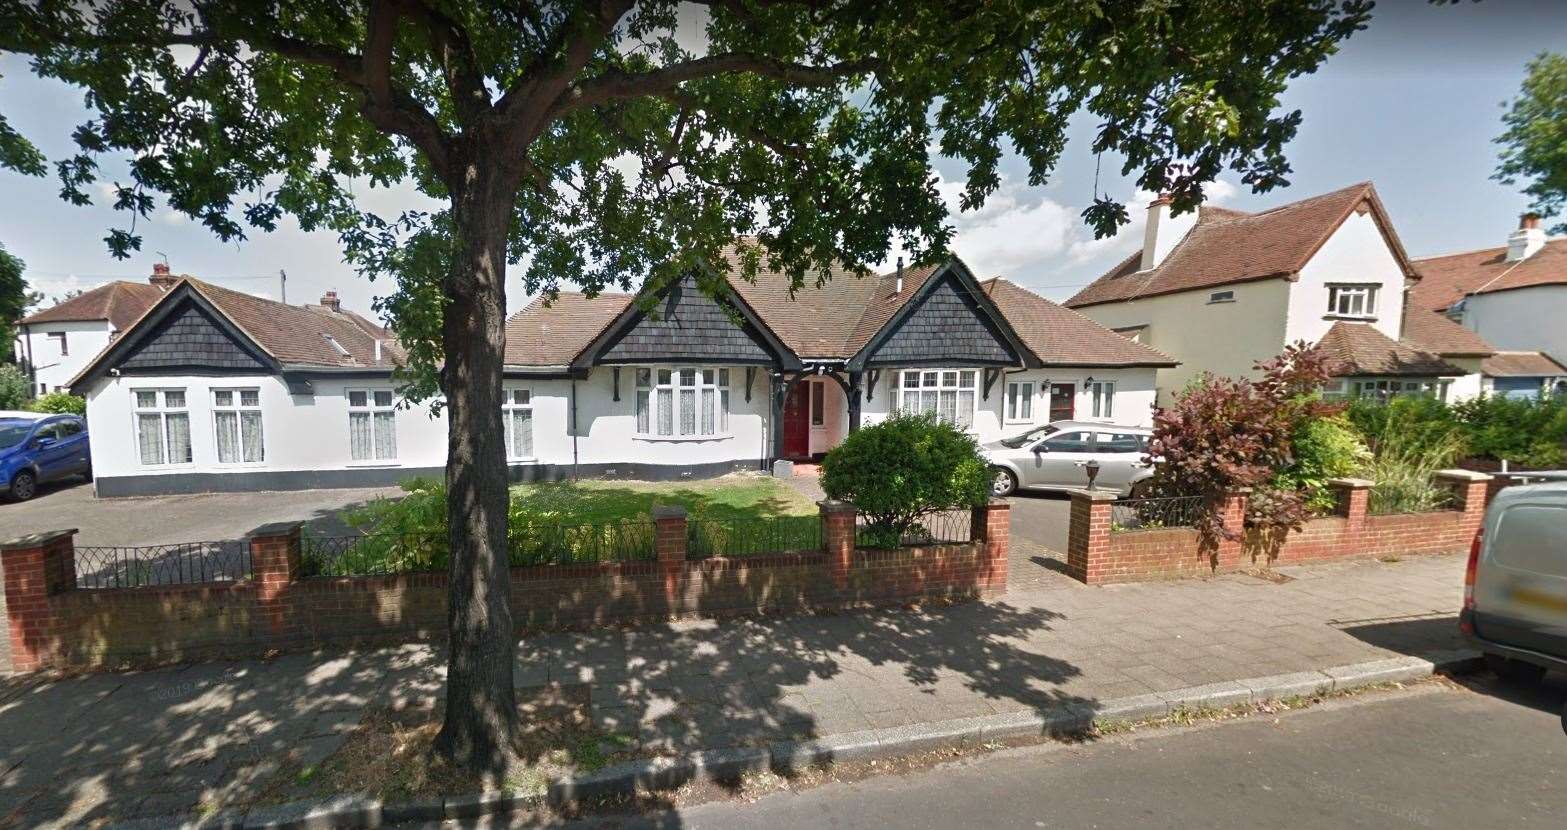 37 Spenser Road in Herne Bay was also rated inadequate by CQC inspectors